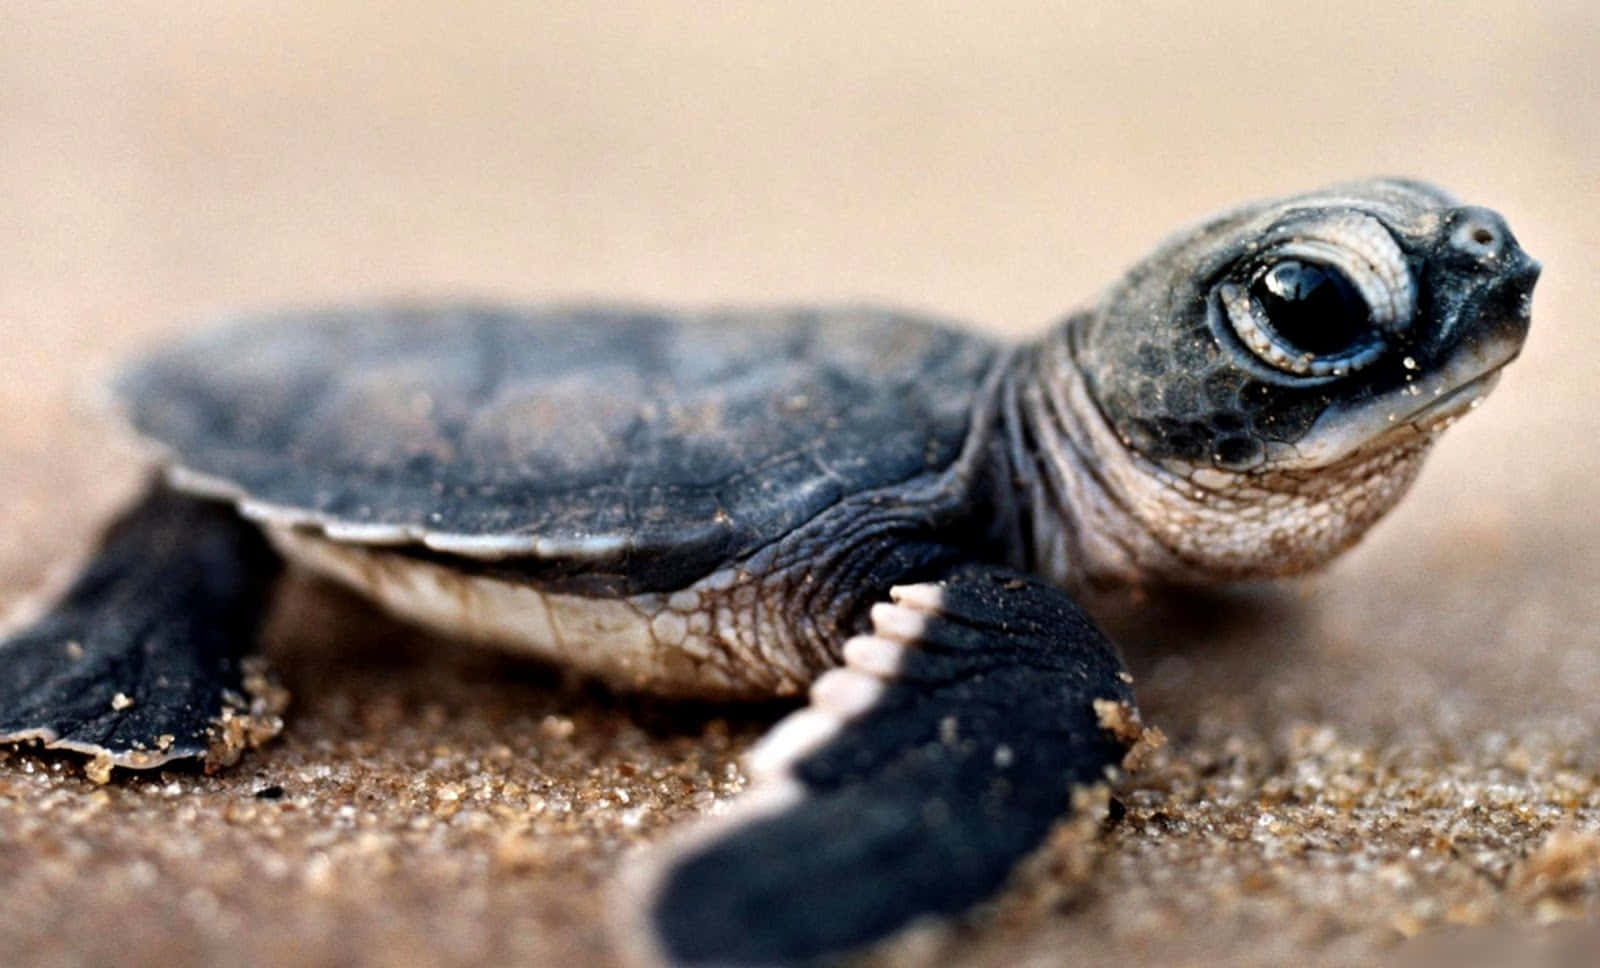 Welcome to the Wonderful World of Cute Turtles